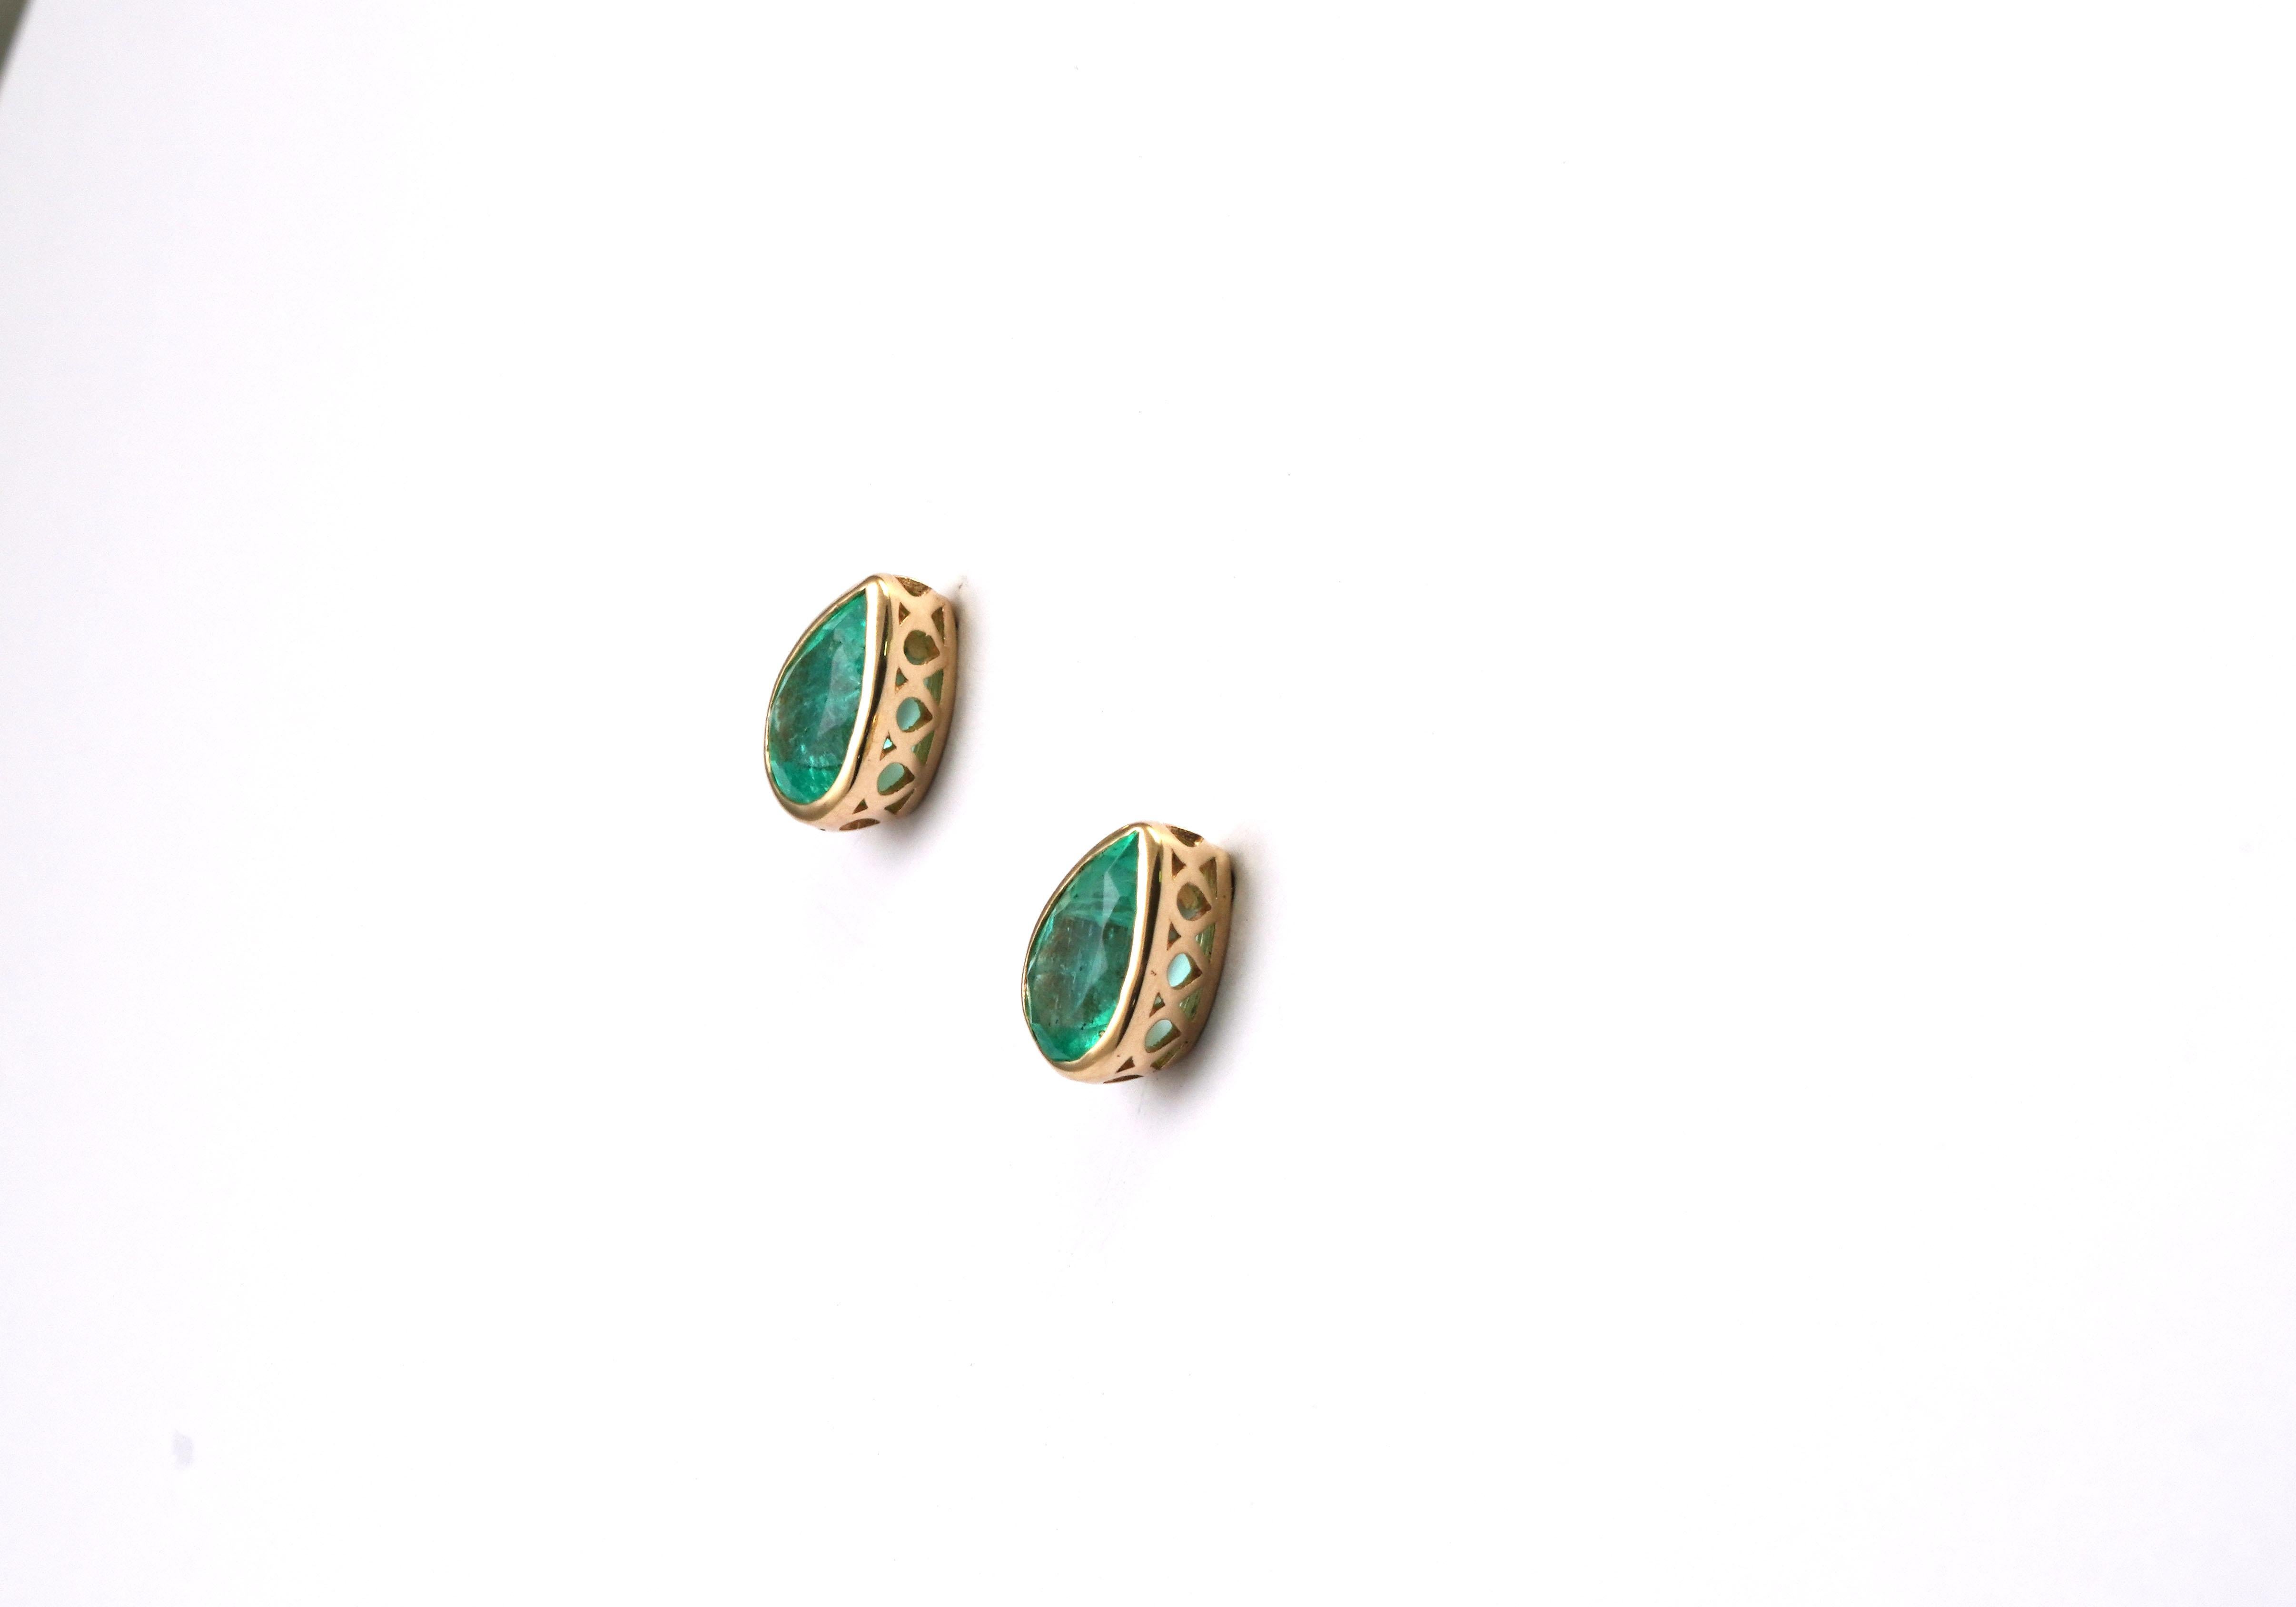 14 Karat Yellow Gold Emerald Earrings
Gold kt: 14 
Gold color: Yellow
Total weight: 2.03 grams

Set with:
- Columbian Emerald
Cut: Pear
Total weight: 2 x 1.86 carat
Color: Green